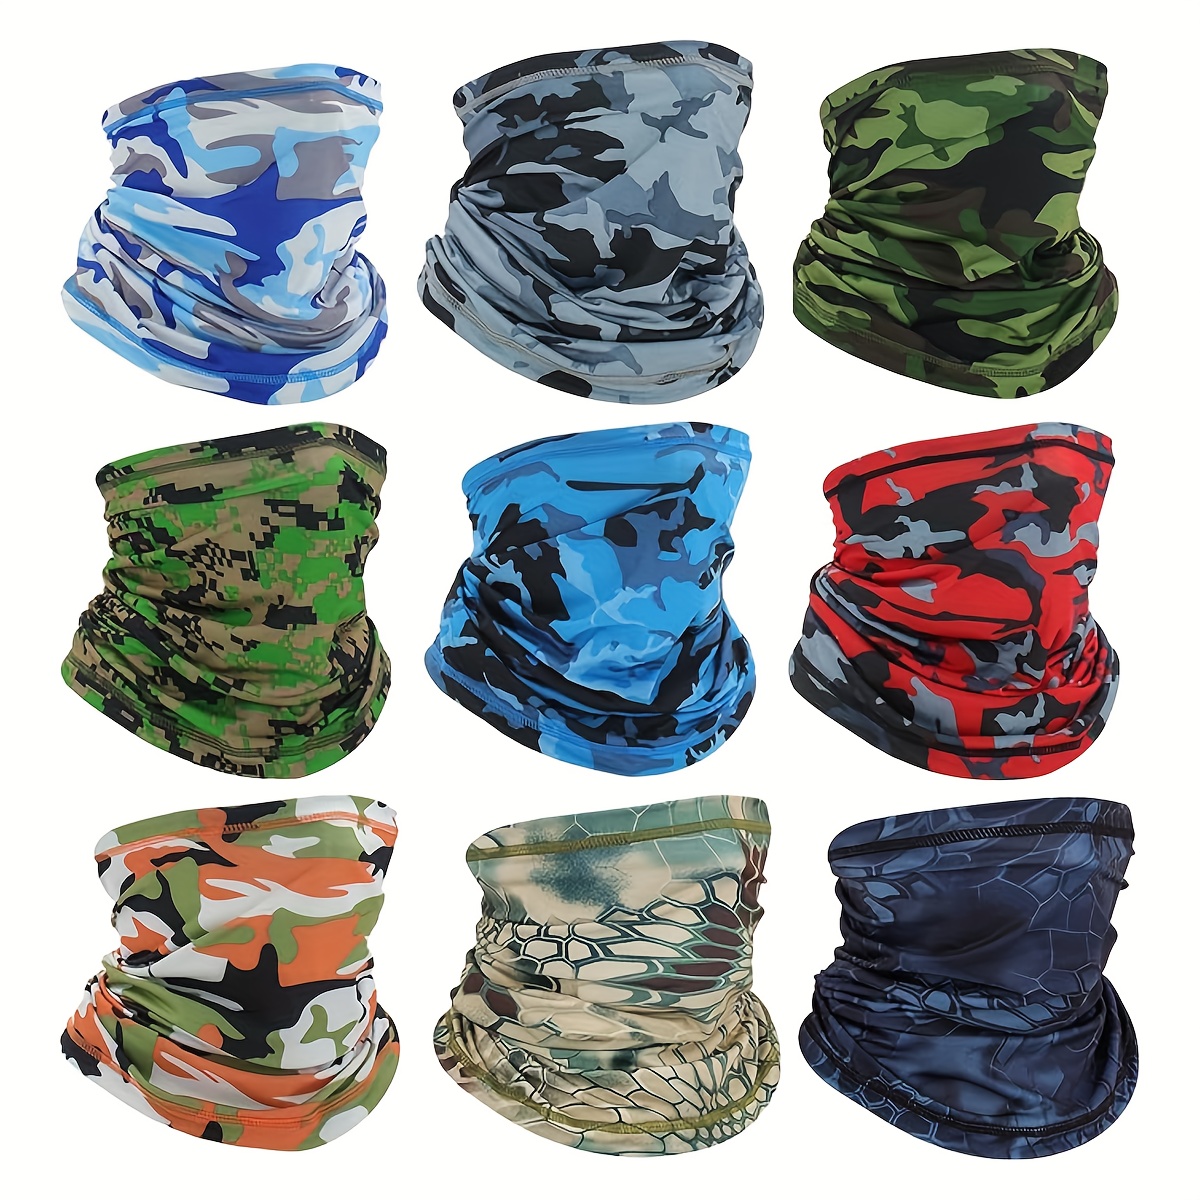 

4pcs/set Camouflage Print Mask Cycling Neck Gaiter Thin Breathable Face Mask Outdoor Hiking Sports Fishing Uv Face Shield For Women Men